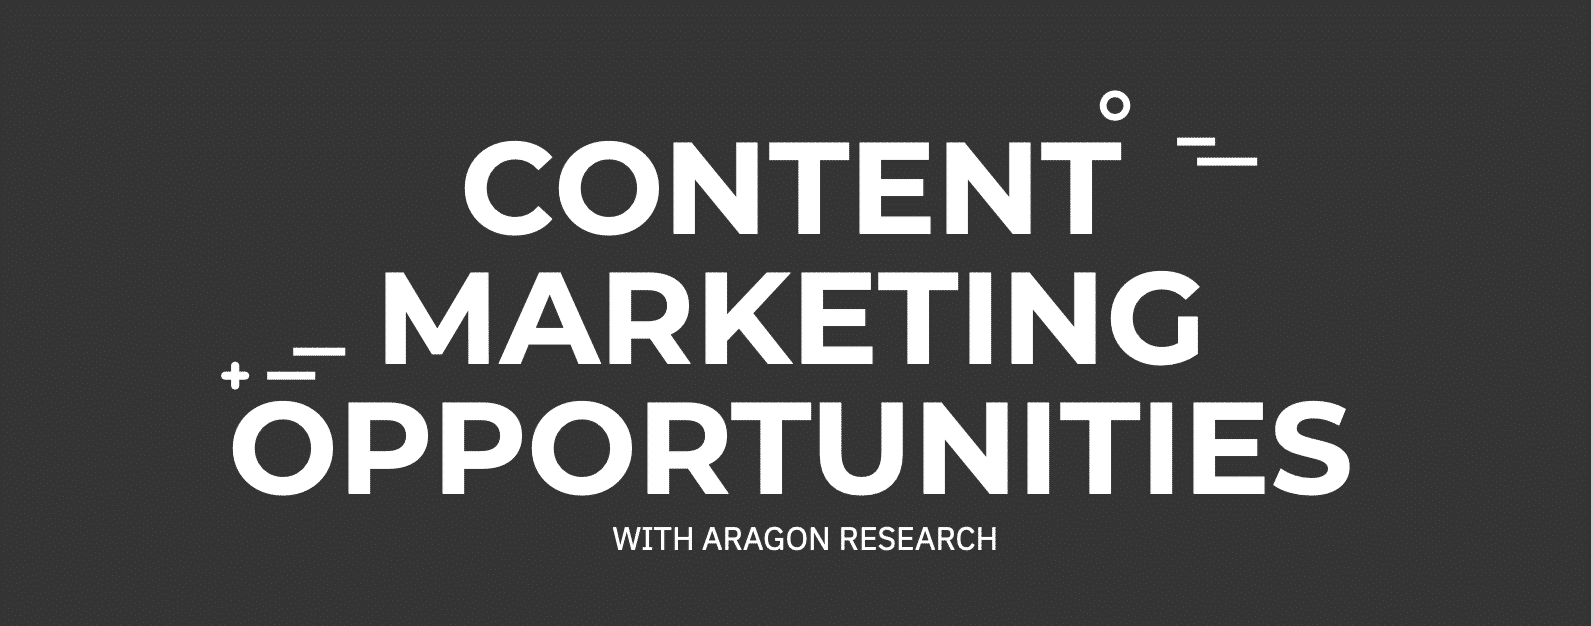 Content Marketing Opportunities